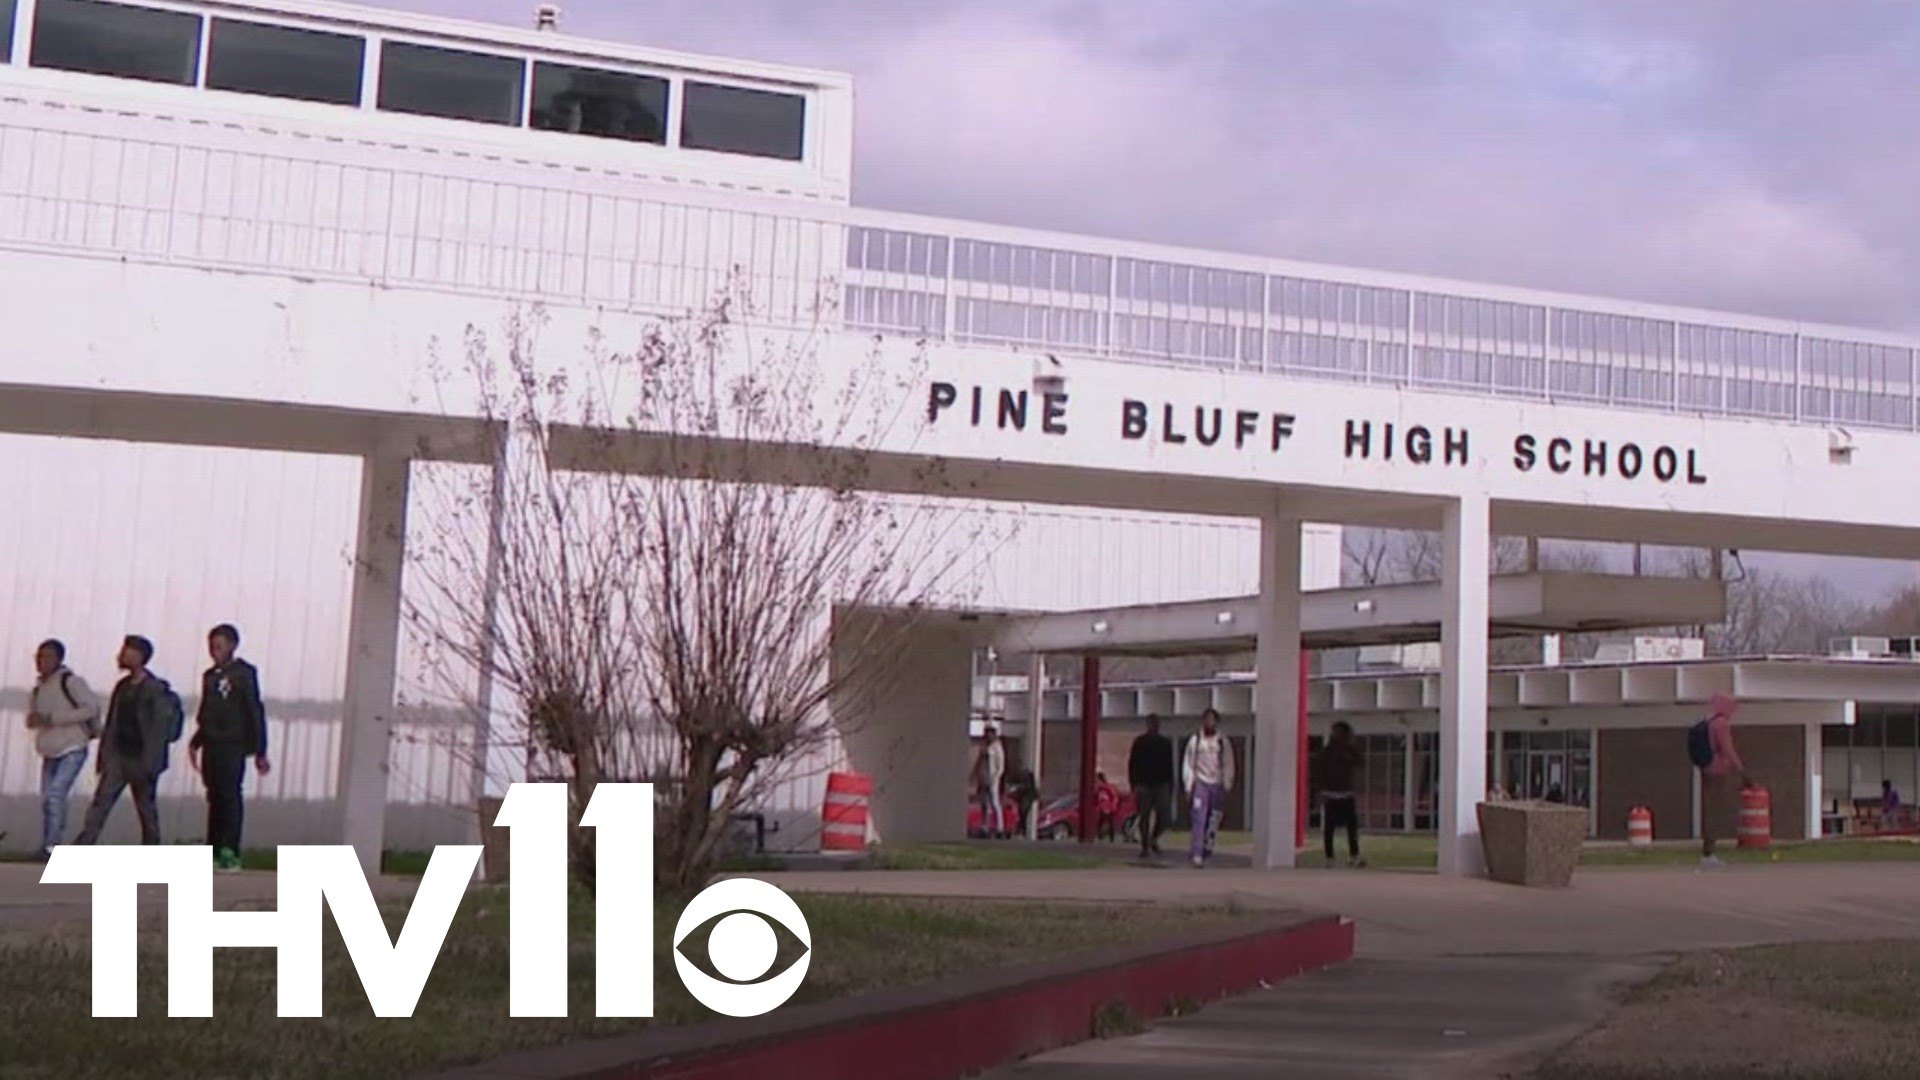 Starting next school year, Pine Bluff staff and students will be at school earlier in the summer, with more breaks throughout the year. Here’s why.